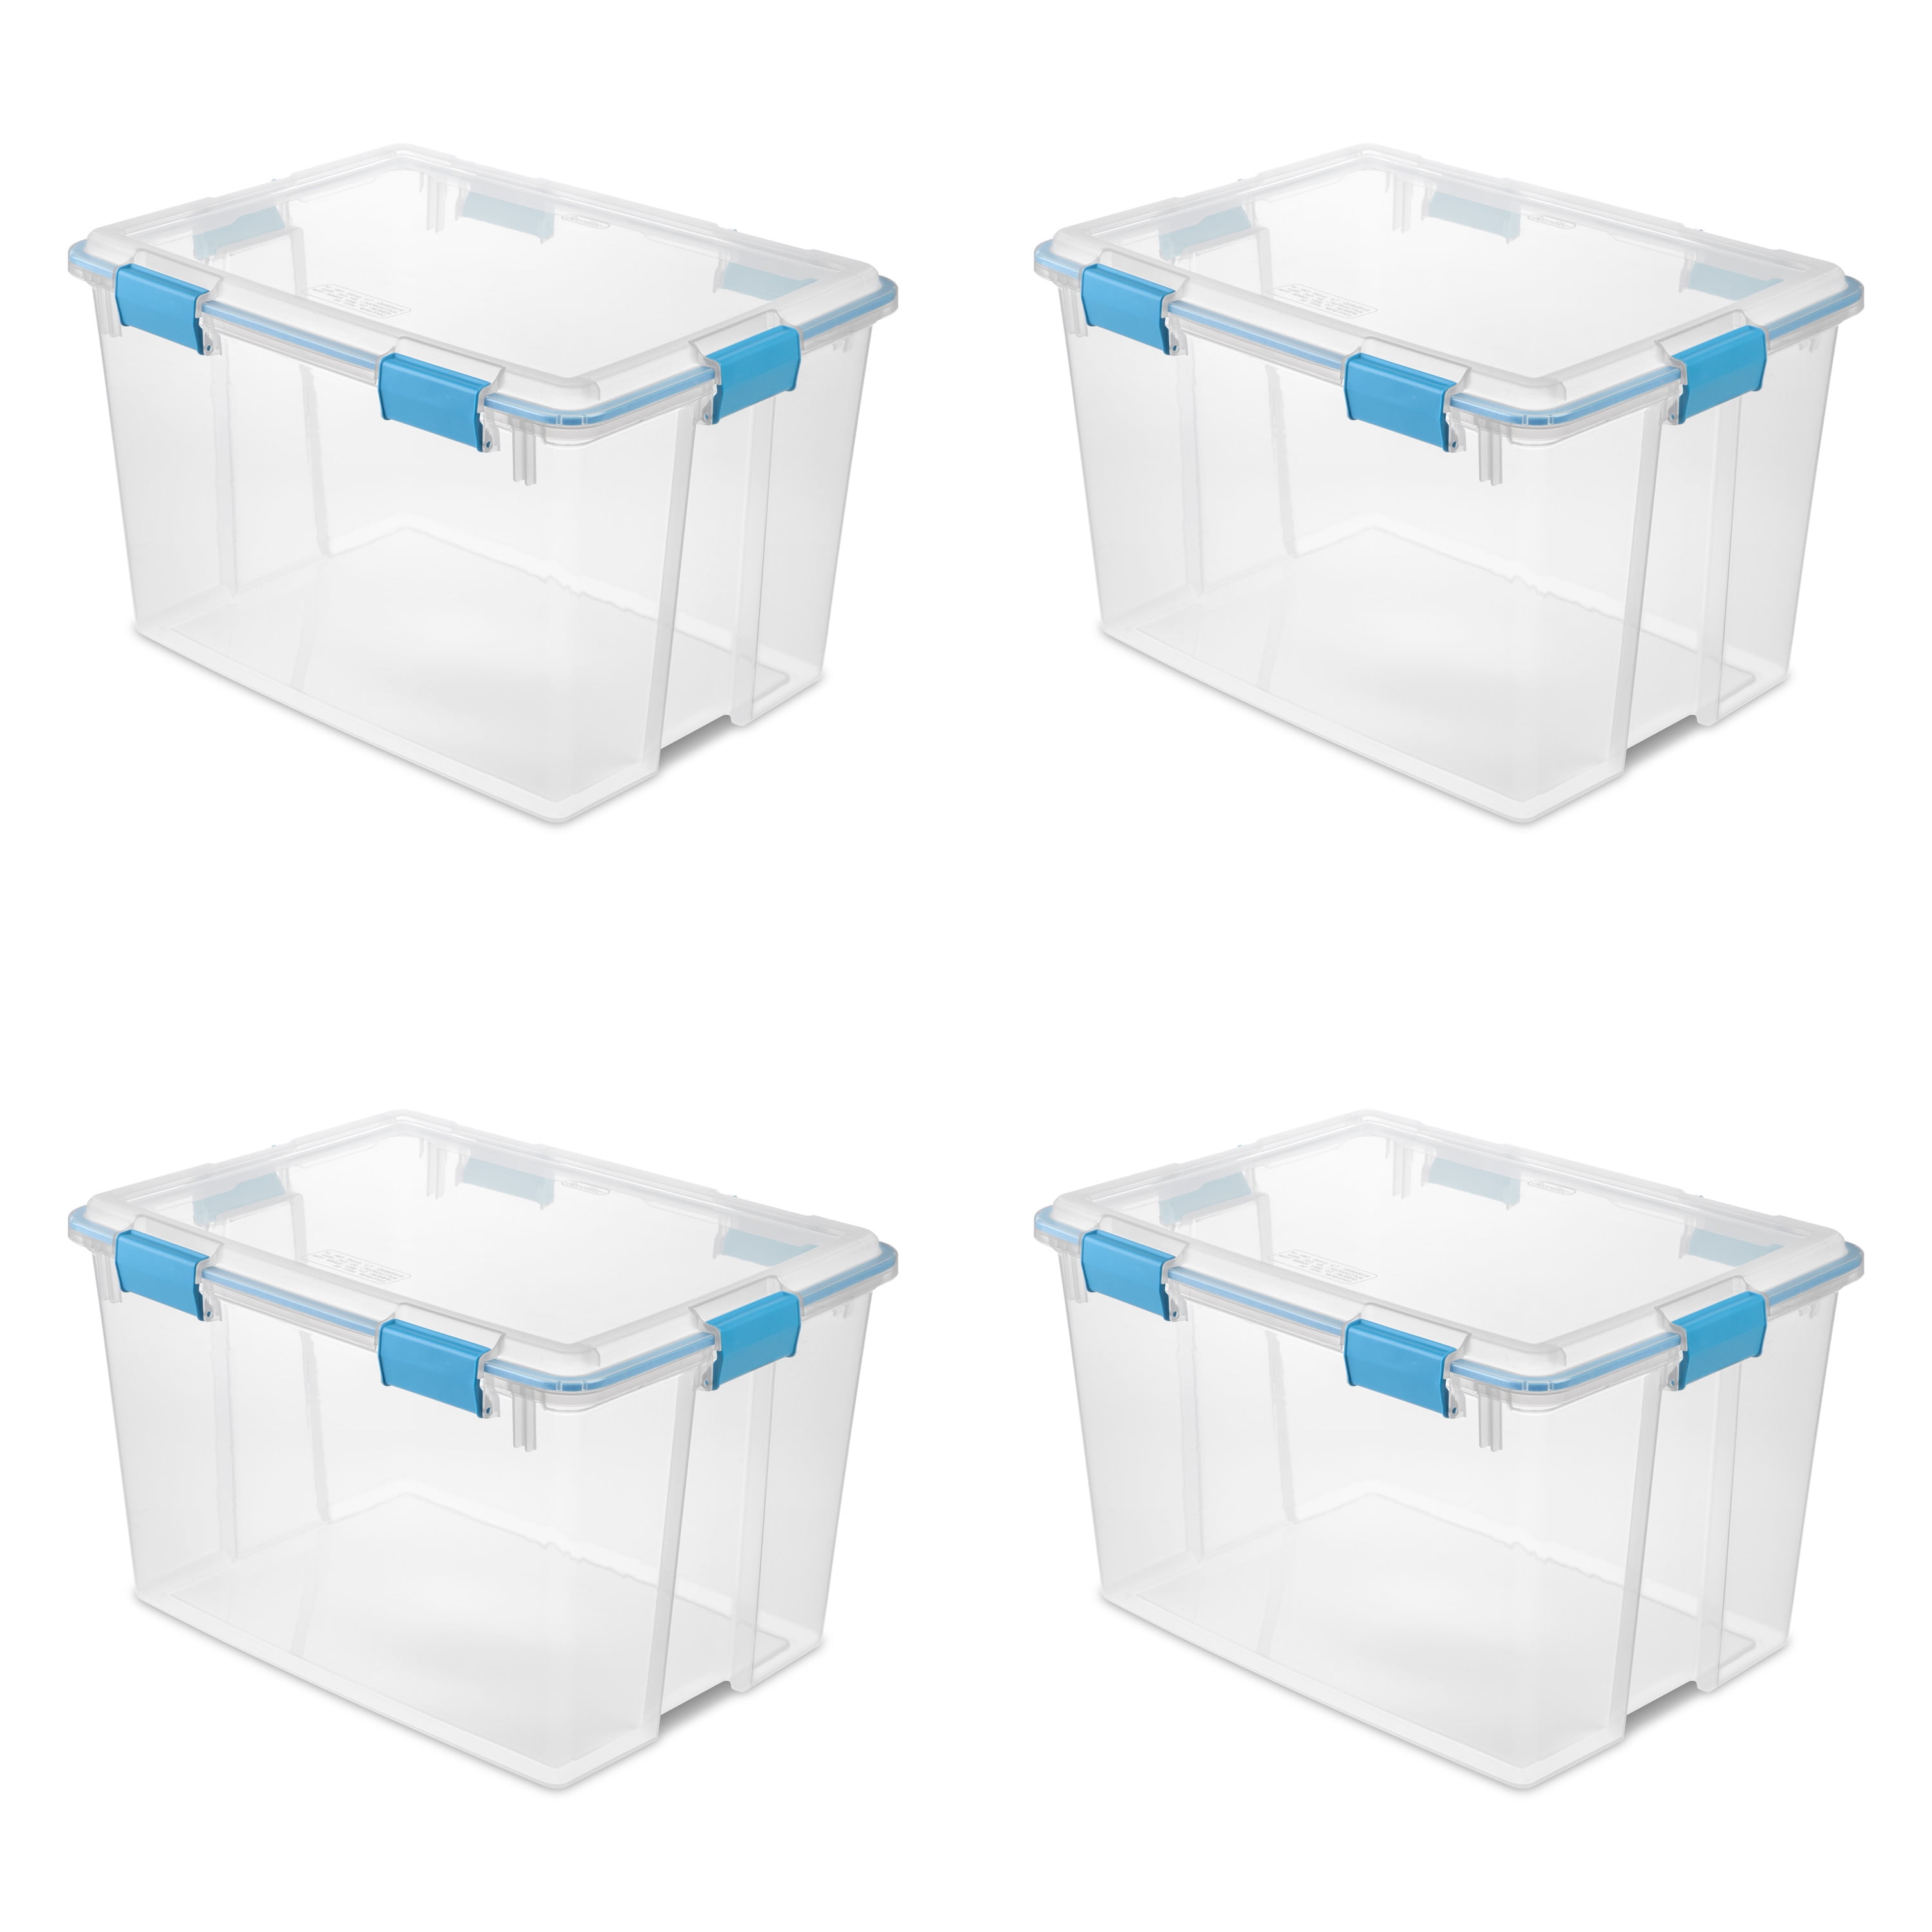 BLACK/CLEAR LID NEW STRONG BOX MULTI PACKS OFF 80 LITRE PLASTIC STORAGE BOX 